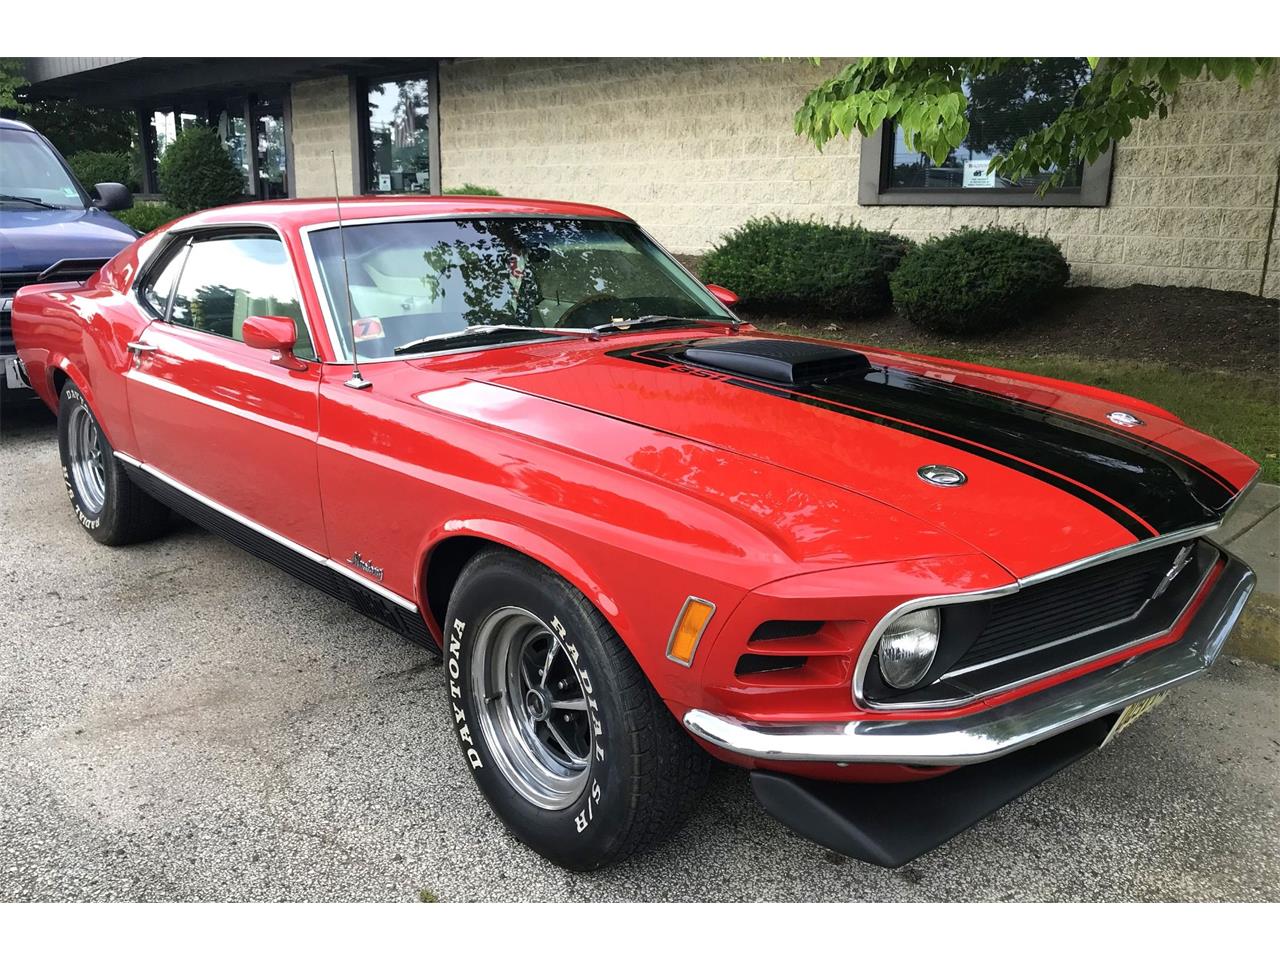 1970 Ford Mustang Mach 1 For Sale Classiccars Com Cc 1136111